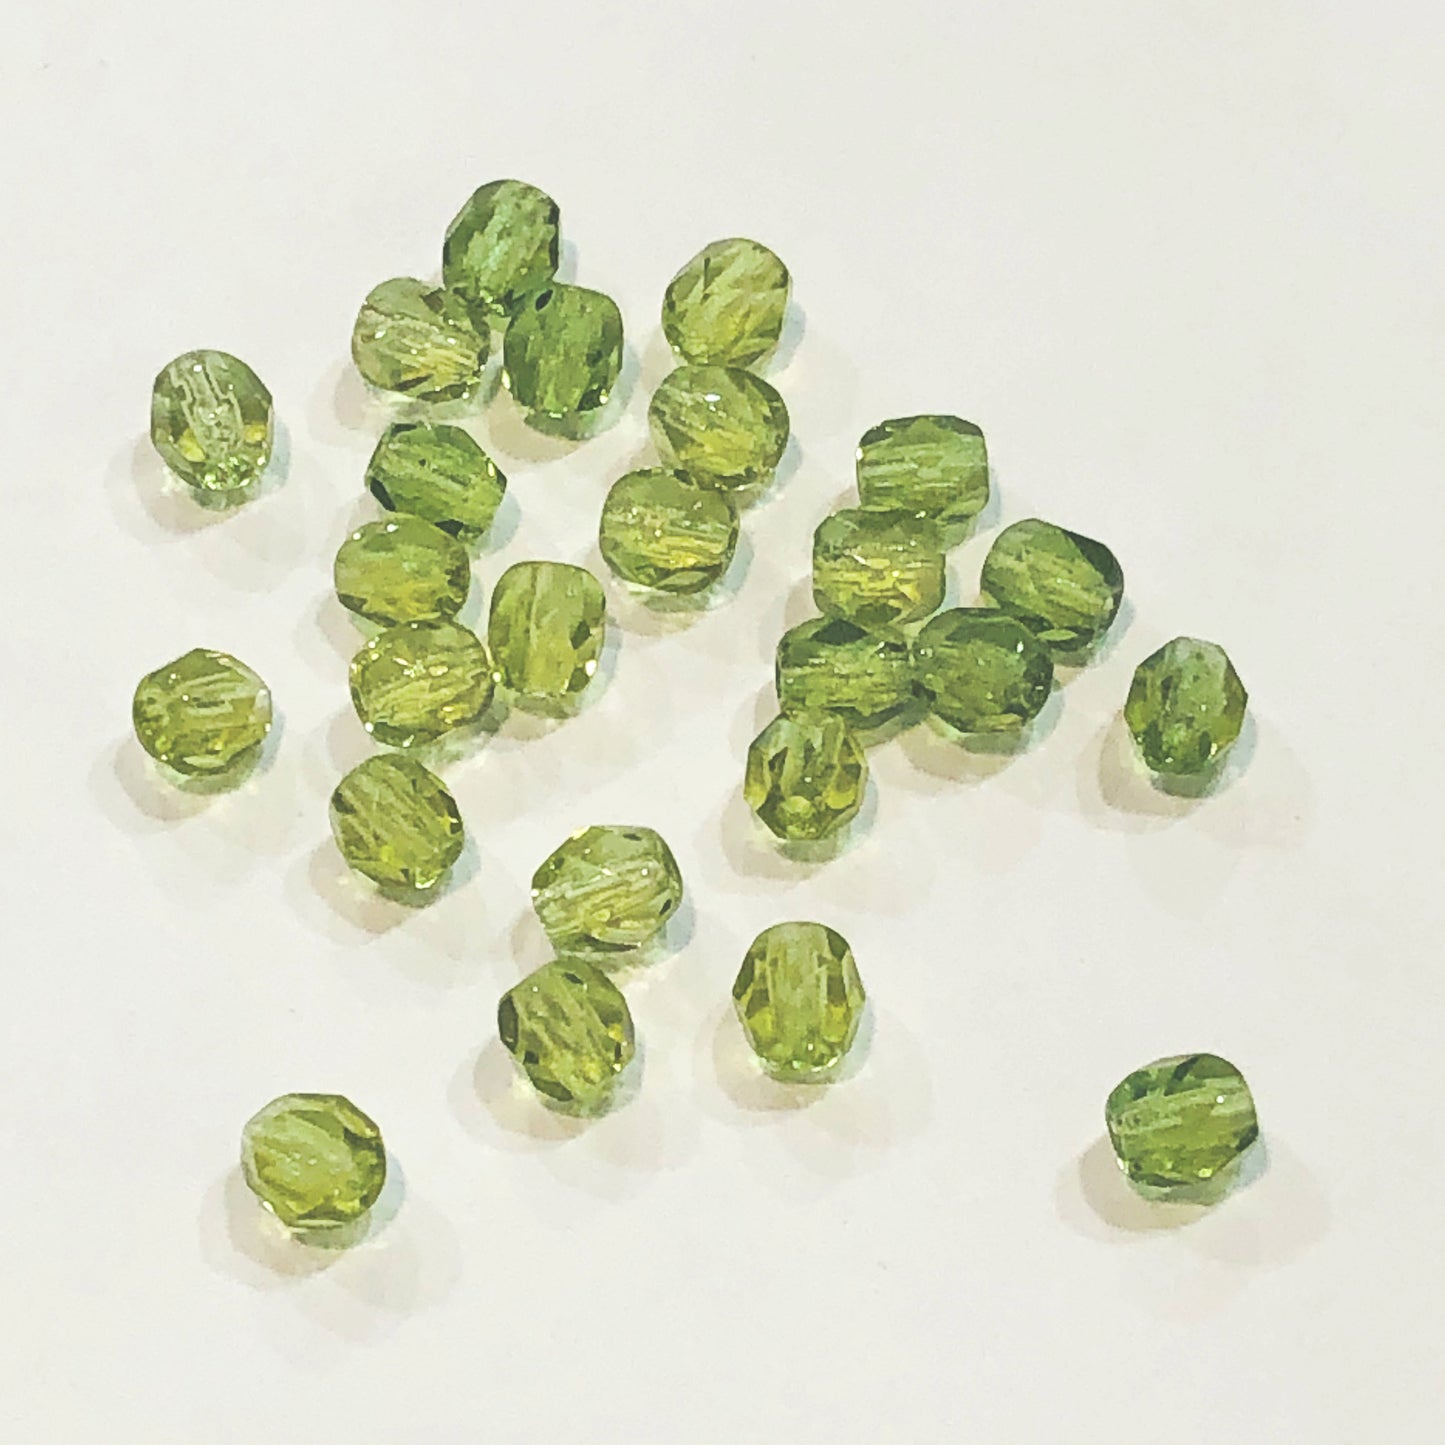 Czech Fire Polished Olivine Faceted Glass Beads, 4 mm - 19 or 25 Beads